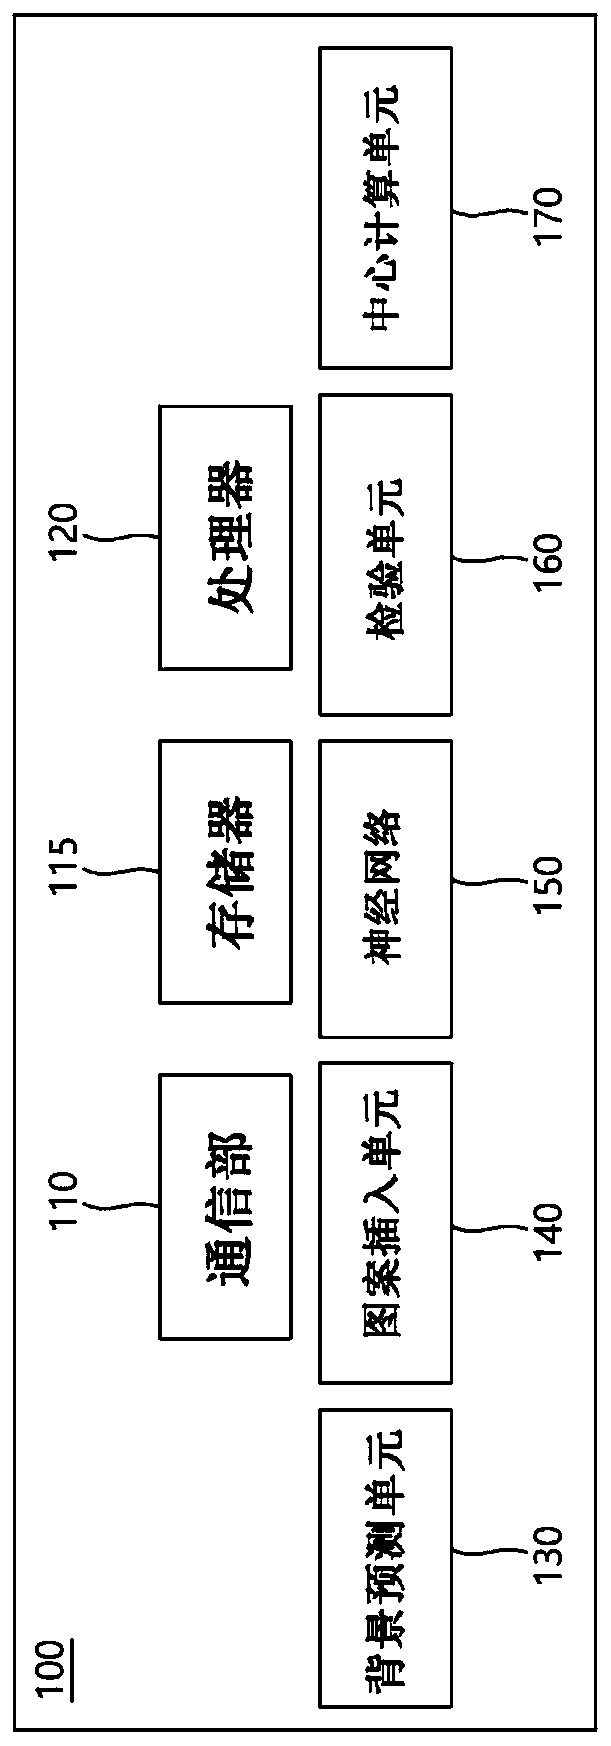 Method and device for enhancing fault tolerance and fluctuation robustness in extreme situations